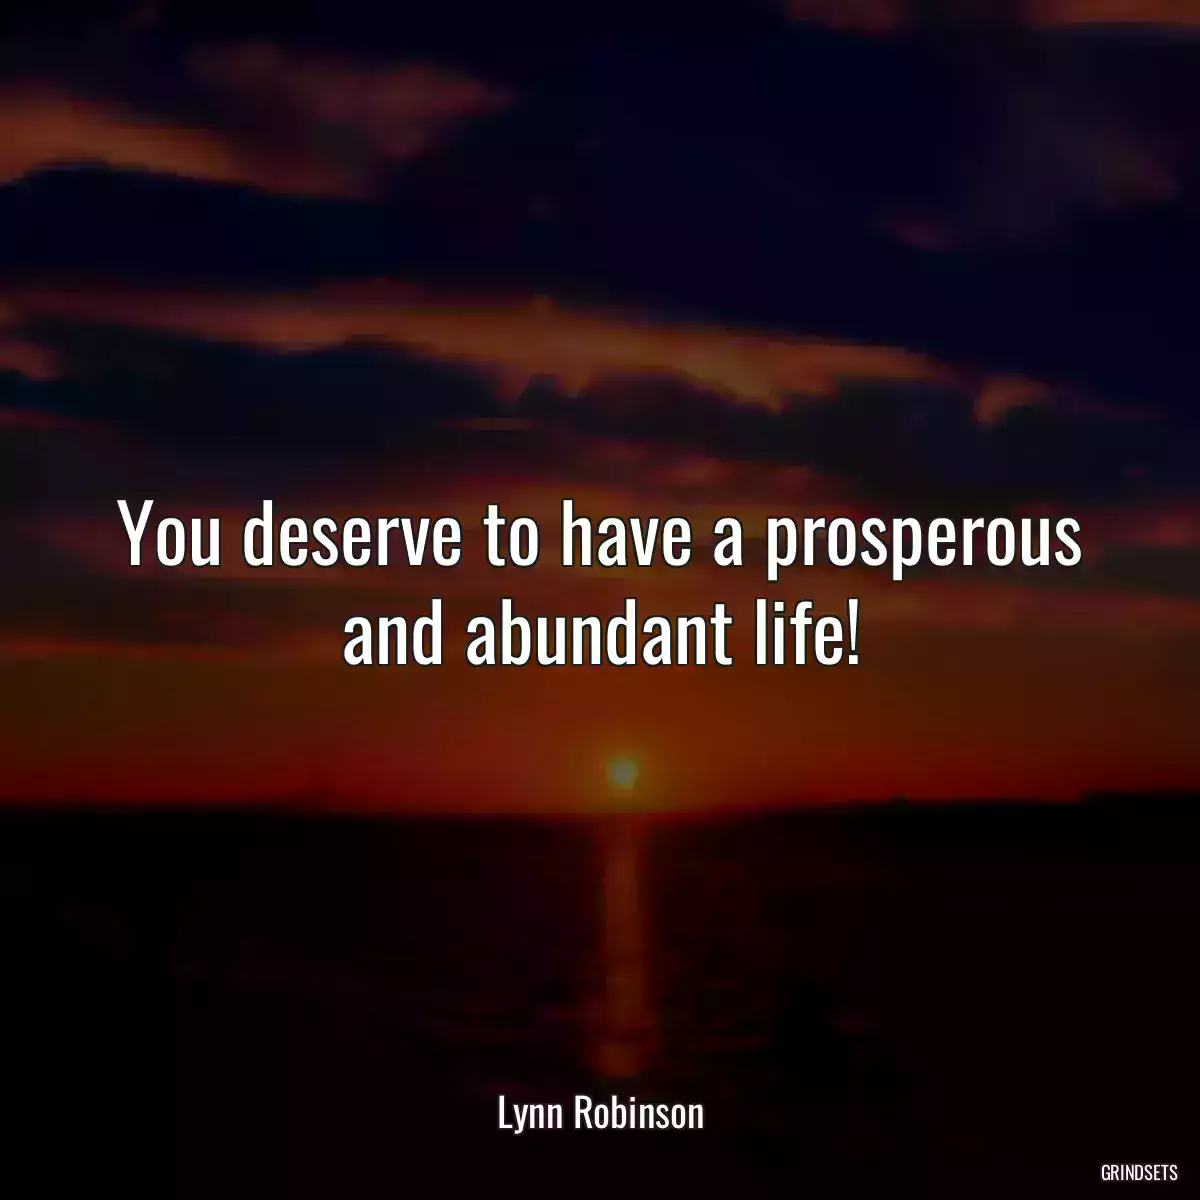 You deserve to have a prosperous and abundant life!